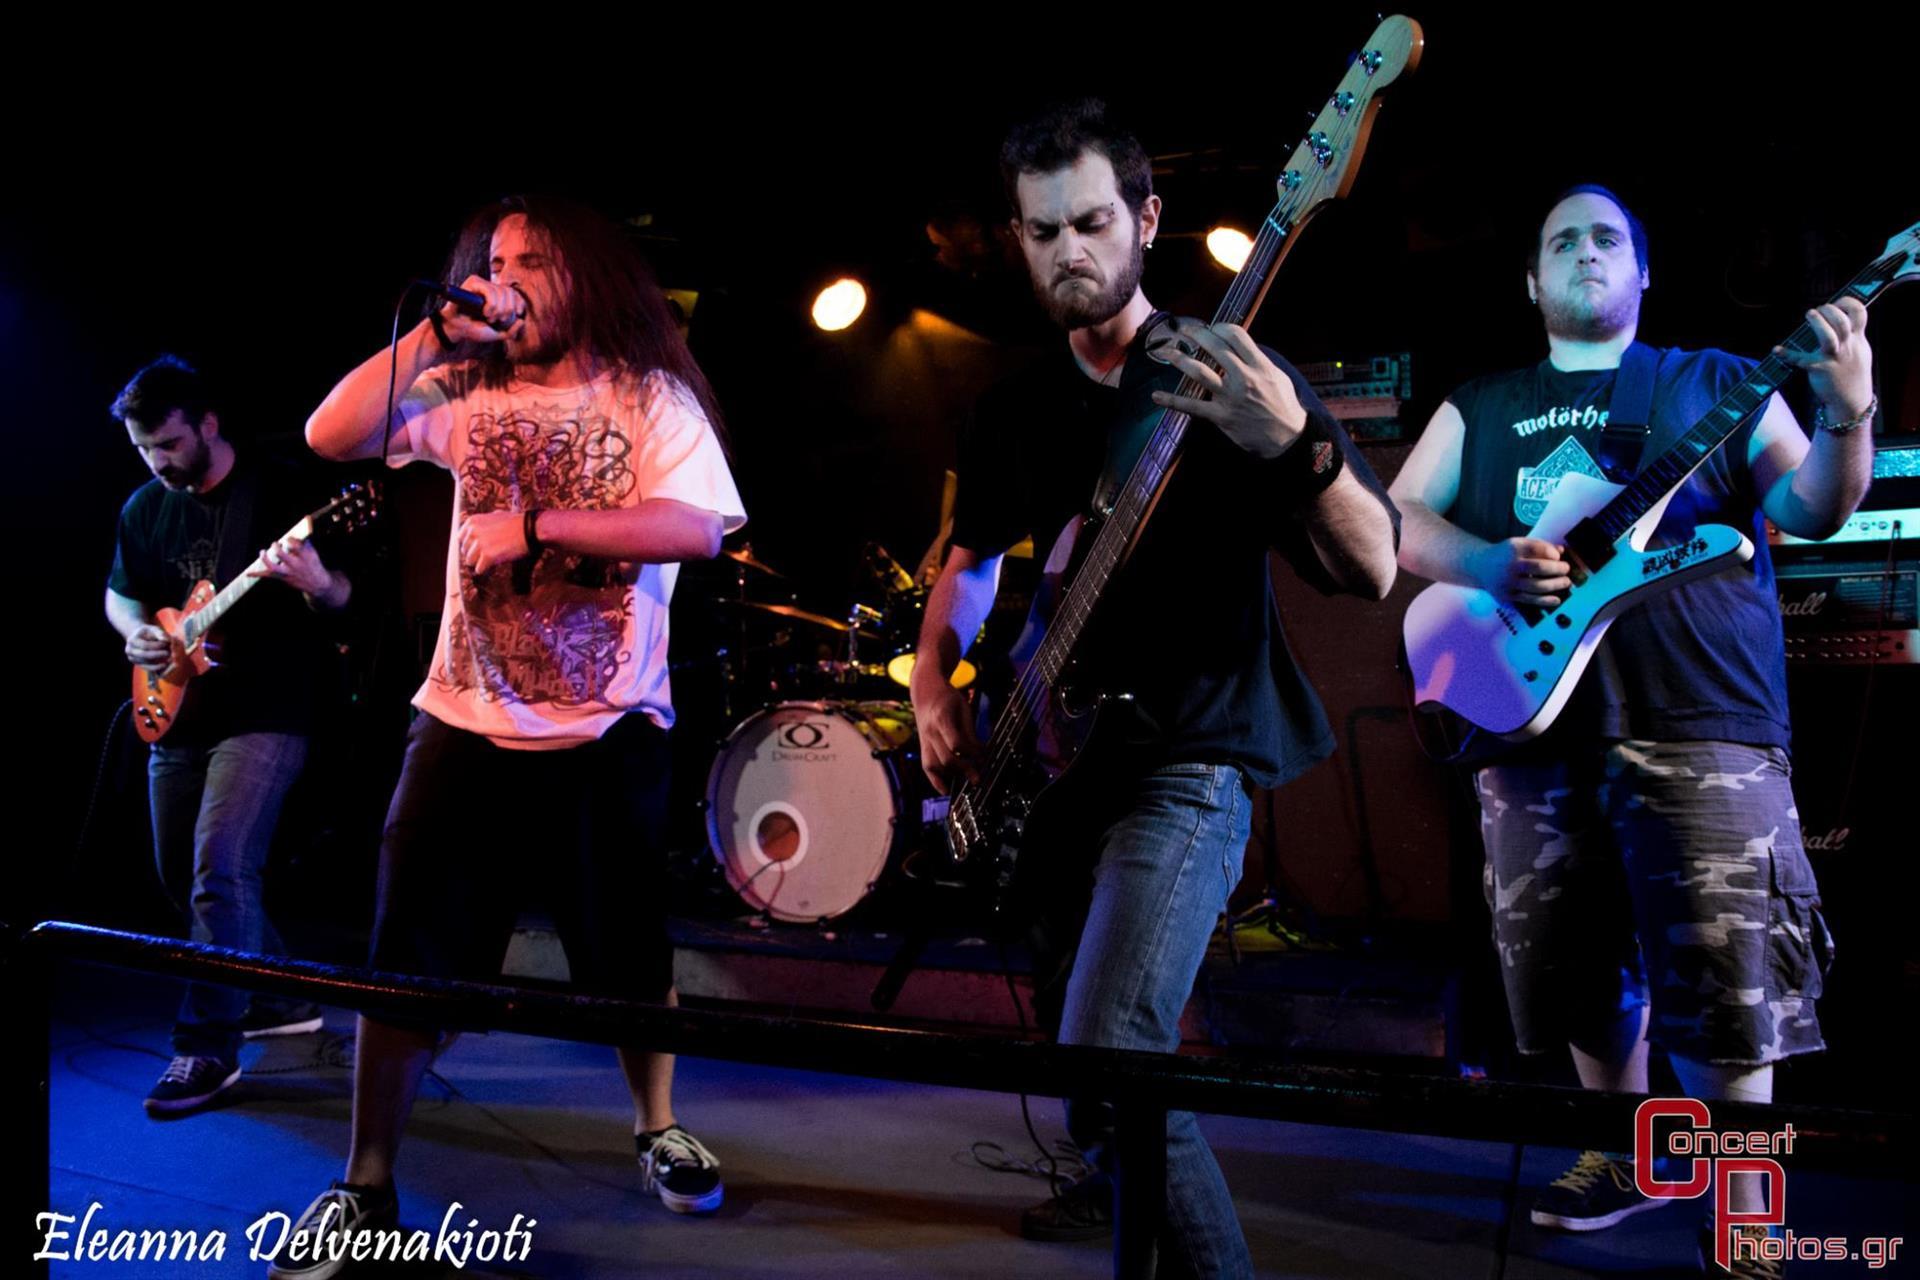 Battle Of The Bands Athens - Leg 4-test photographer:  - Battle Of The Bands-20150208-232432